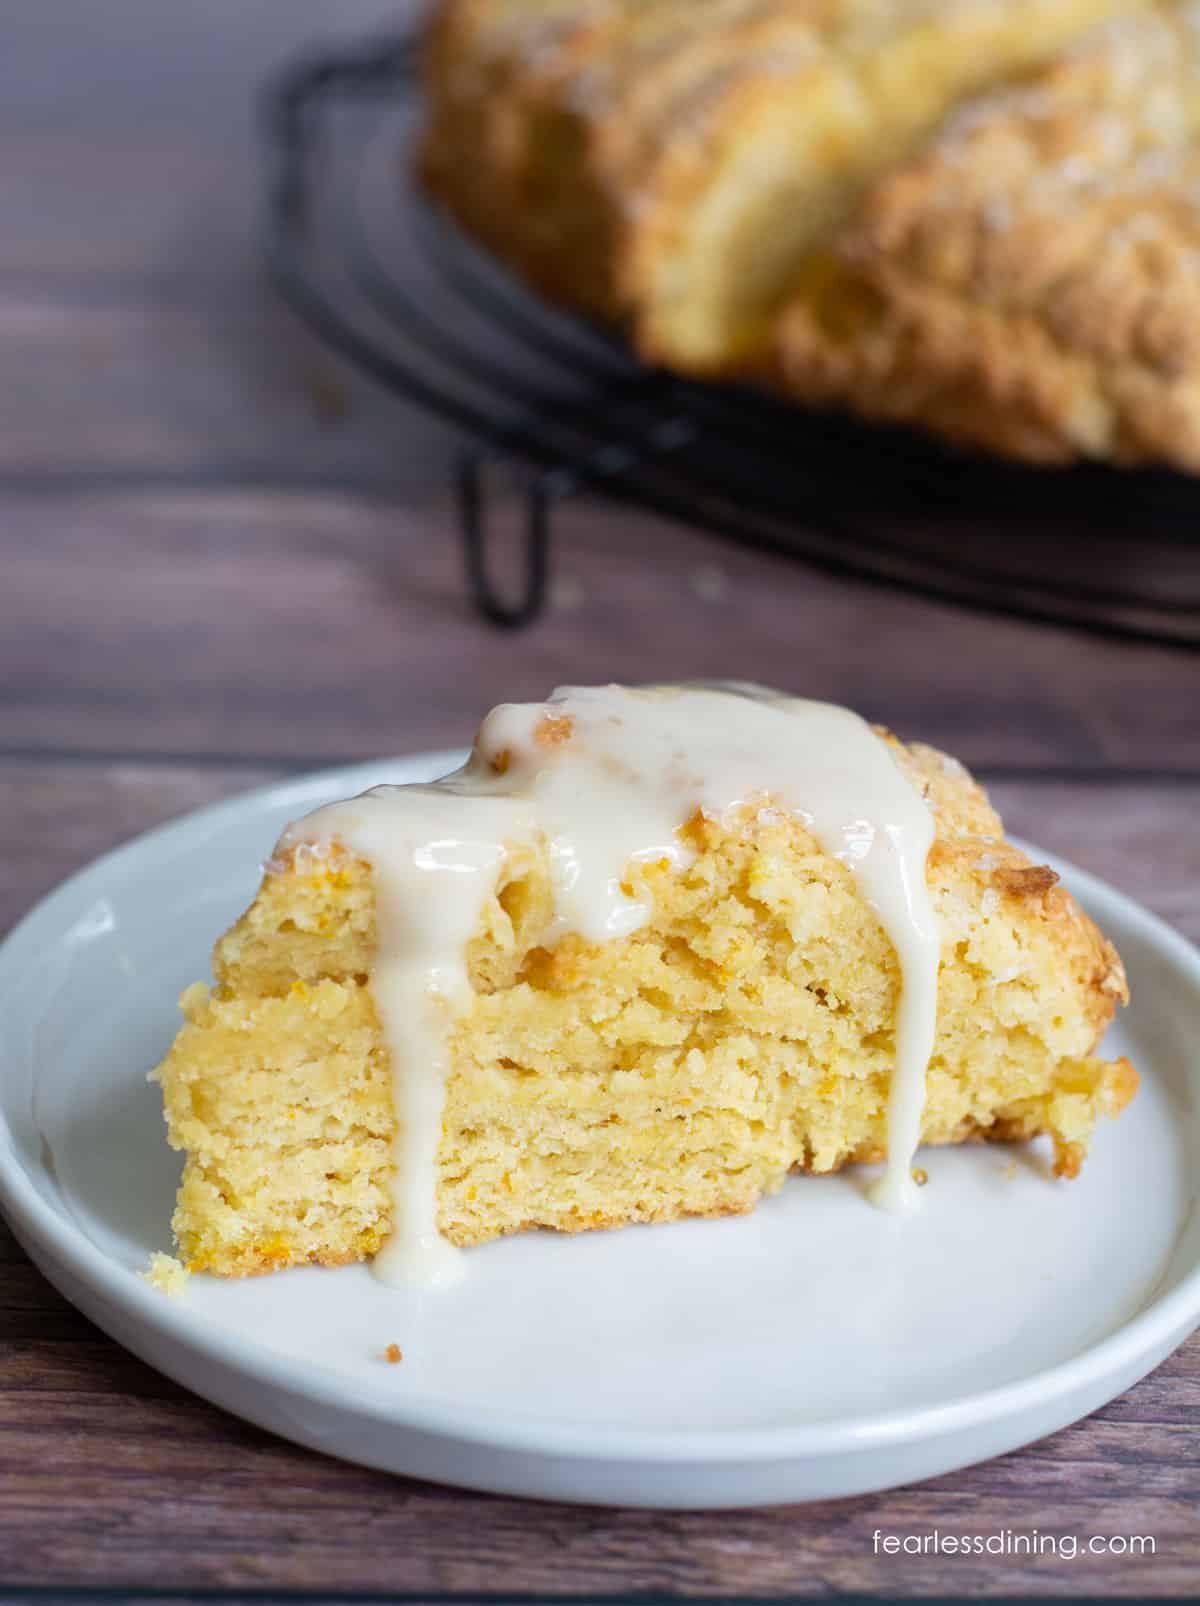 A gluten free orange scone on a plate. The scone has orange icing dripping down over the sides of the scone.